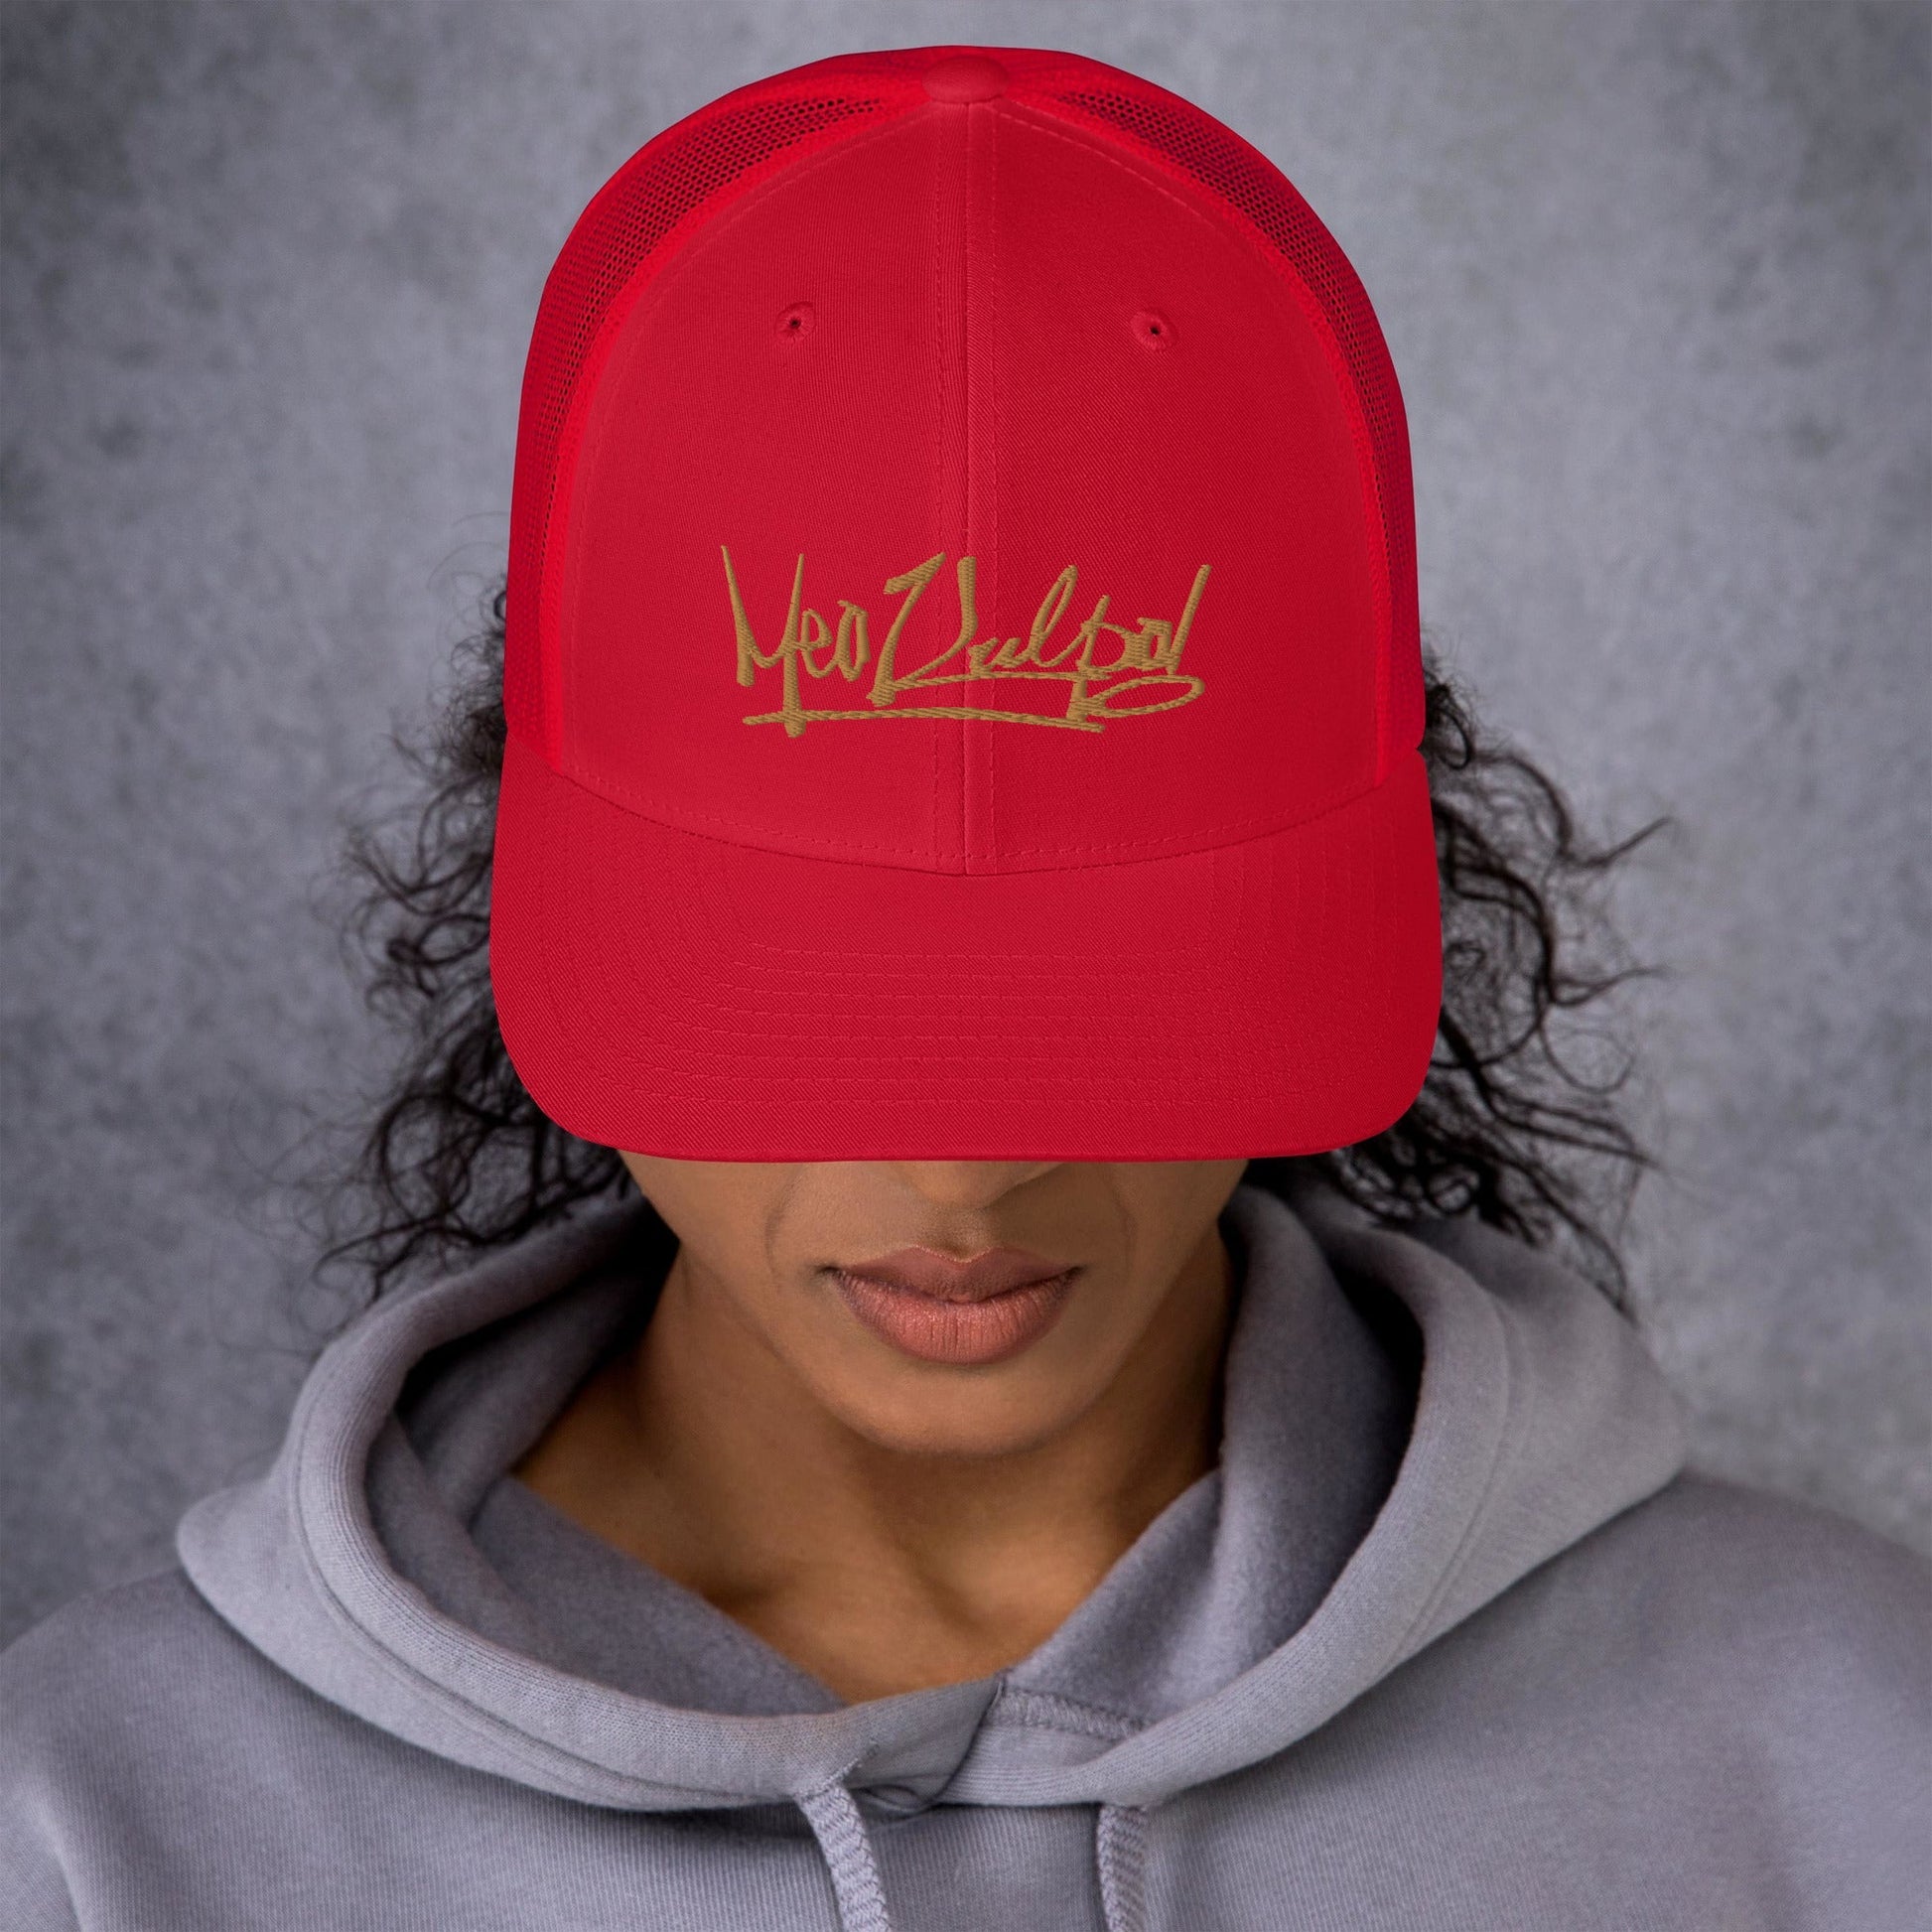 Red Mesh Detail of MeaKulpa Trucker Cap Turn heads from every angle with the MeaKulpa Red Trucker Cap. Admire the sleek back view where the red mesh adds a stylish touch to the overall design. This cap is a symphony of color and sophistication.